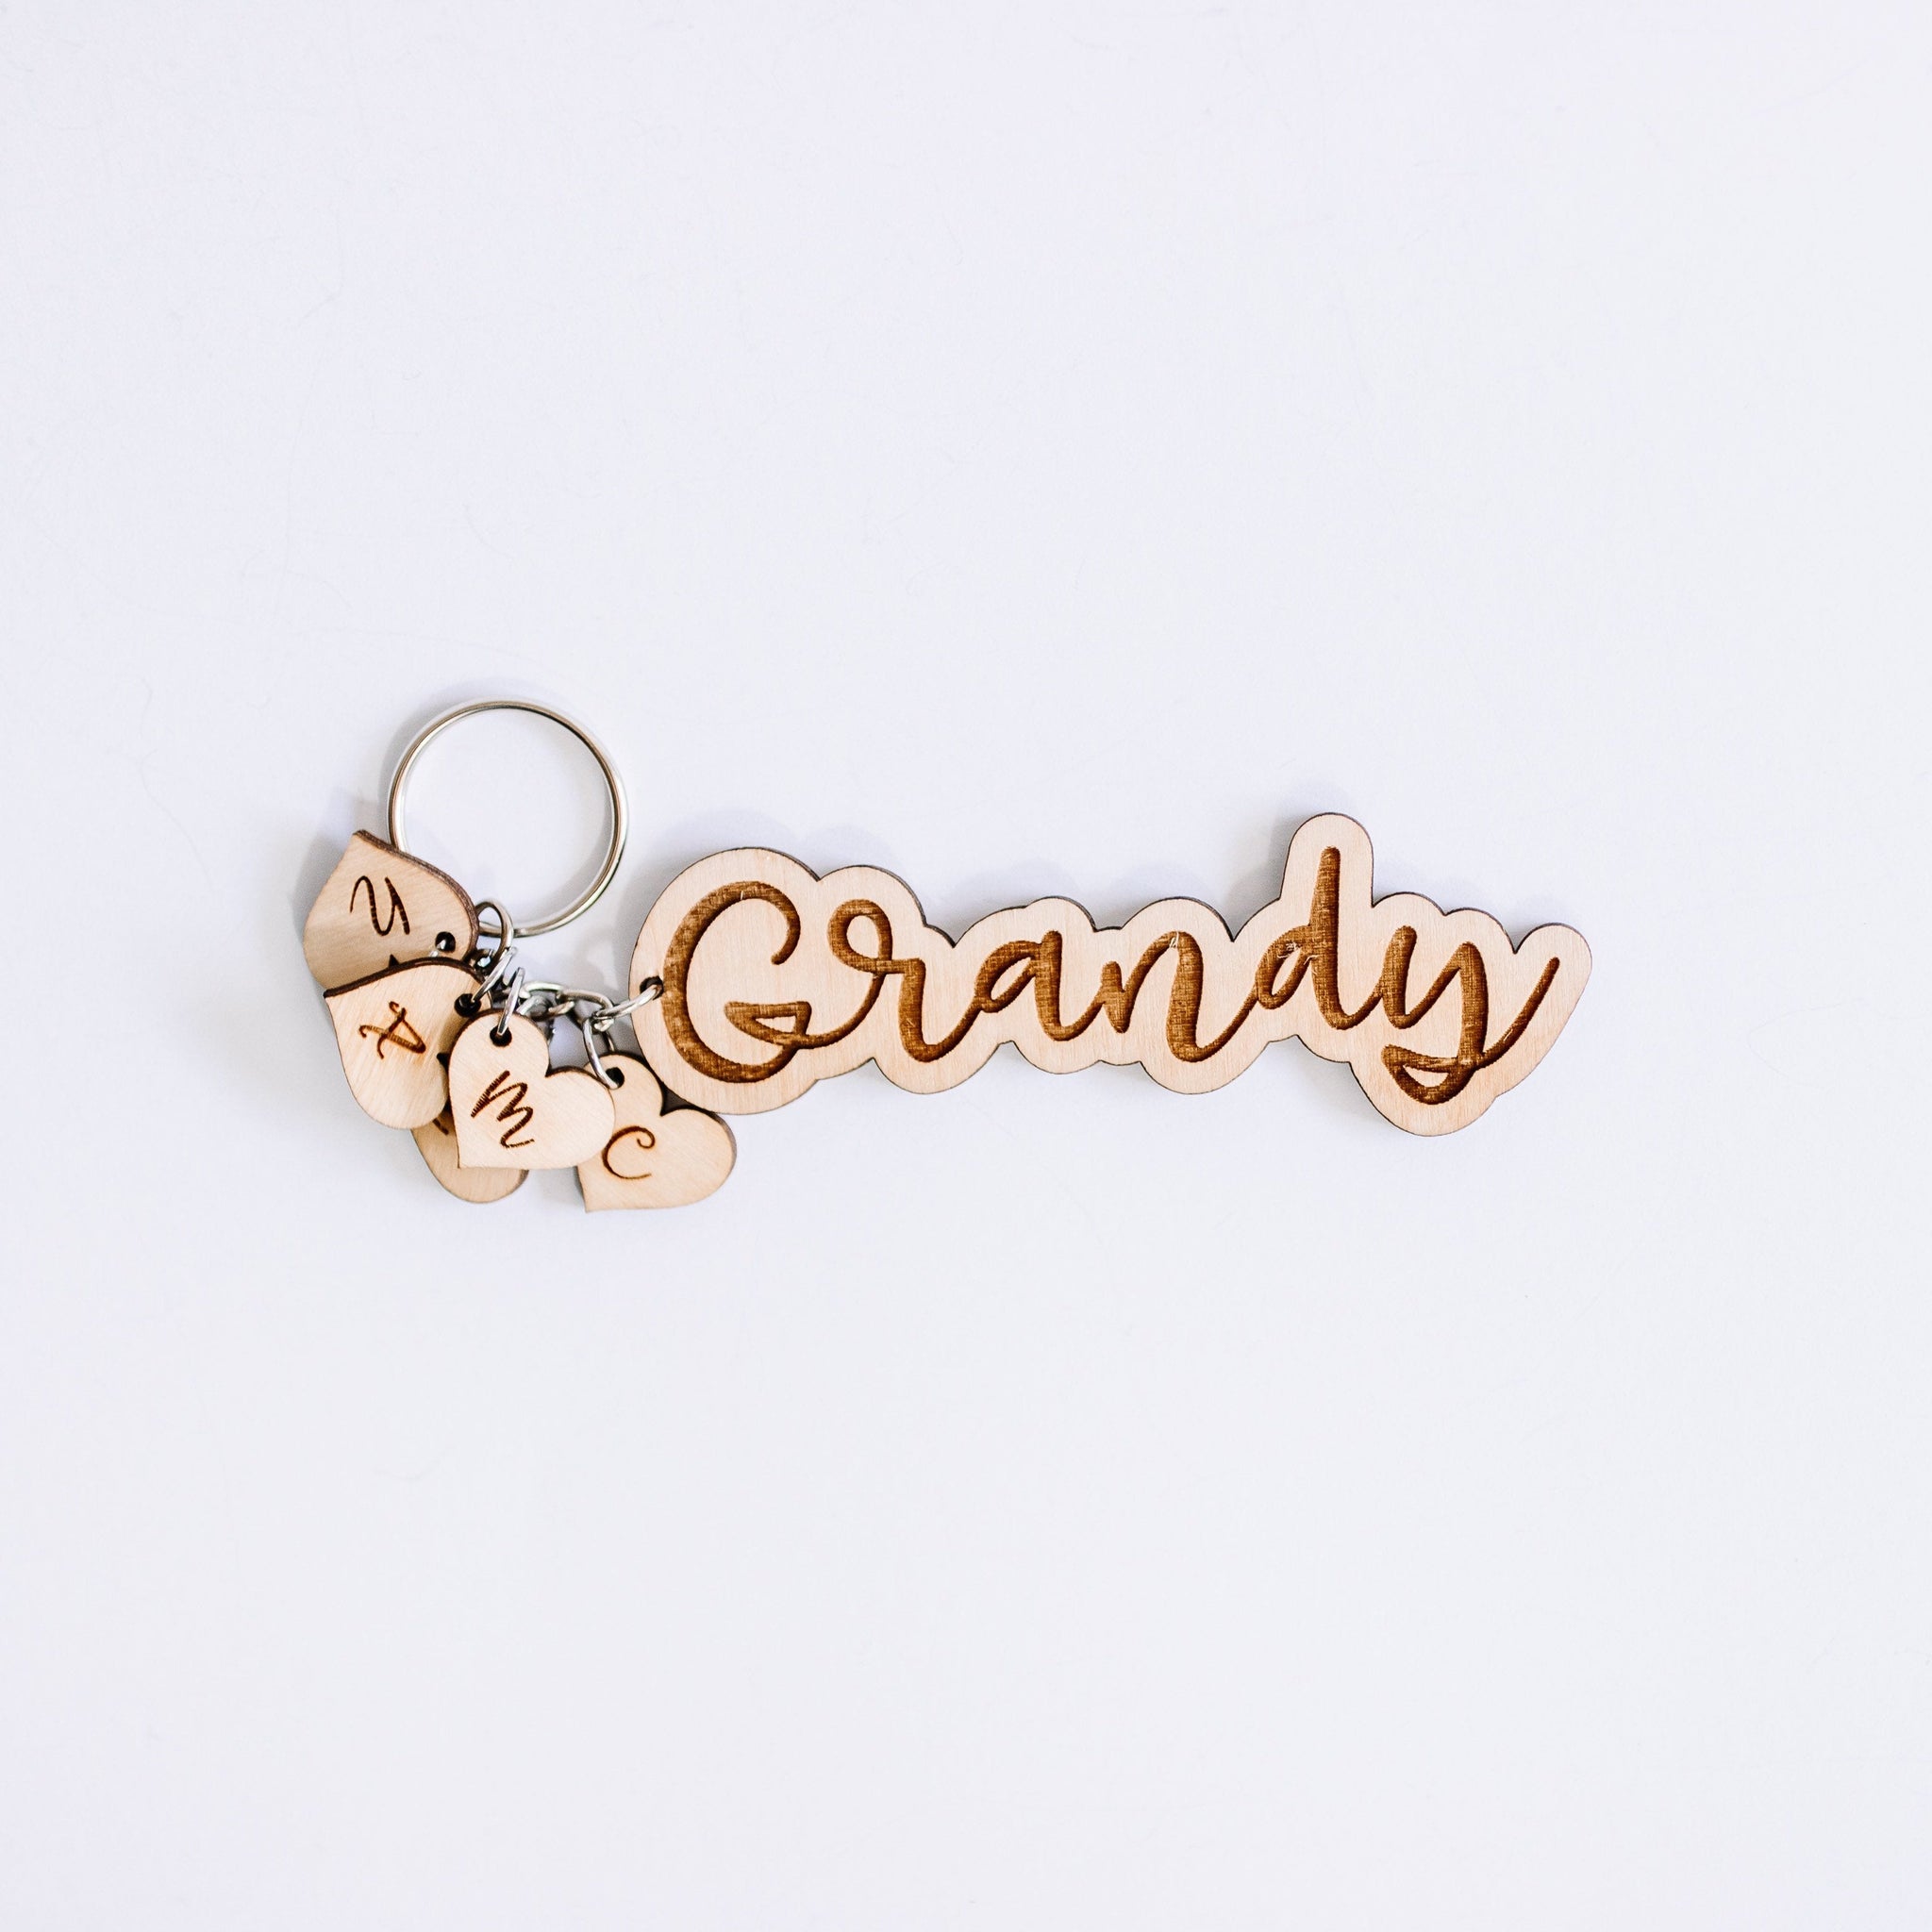 Grandy Wooden Initial Heart Keychain Gift For Grandma, Mother’s Day Wood Child Initial Heart Keychain Charms Gift For Grand Mother